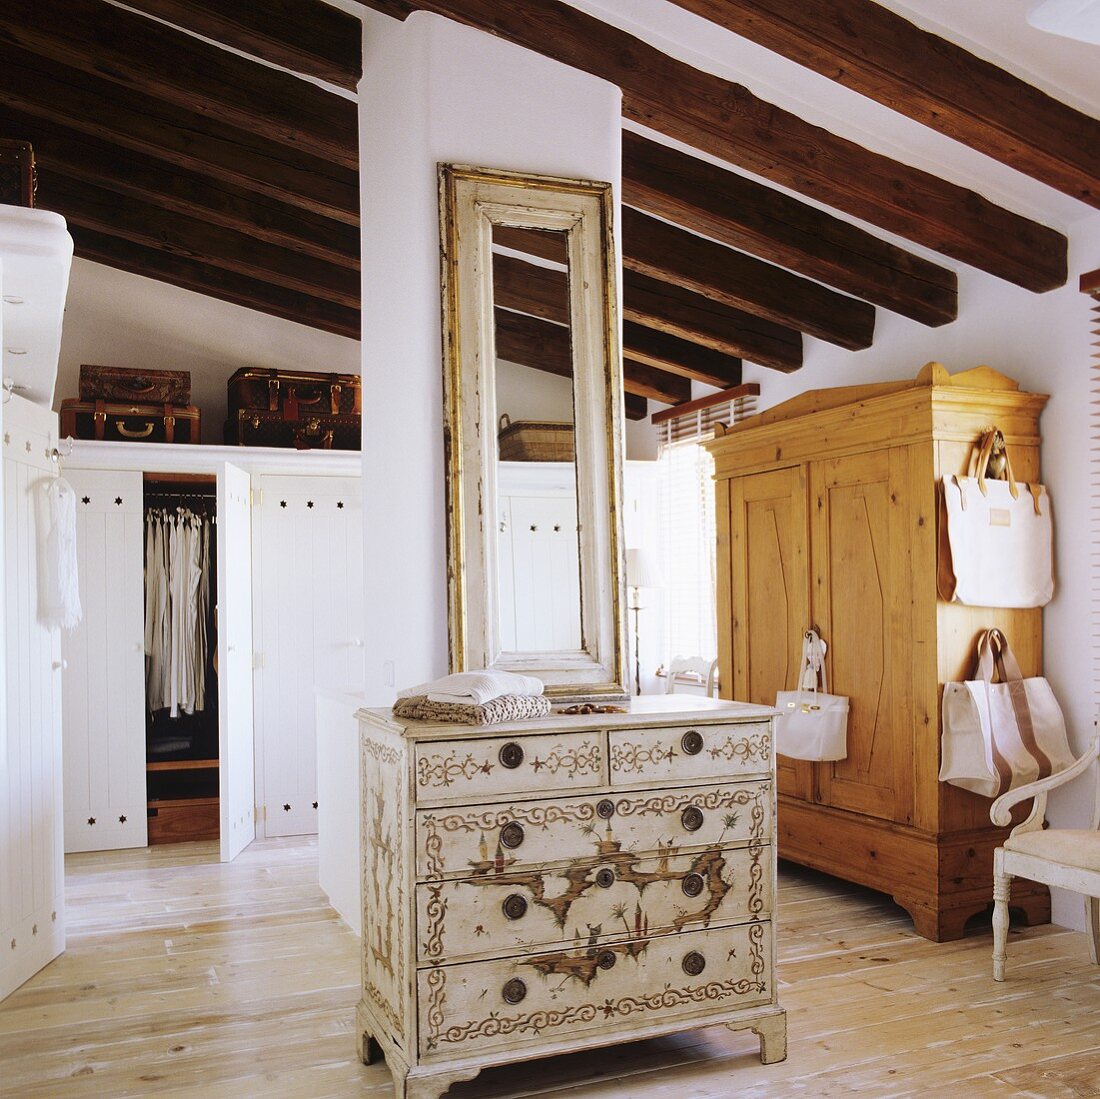 A rustic attic room with a painted chest of drawers in the middle of the room